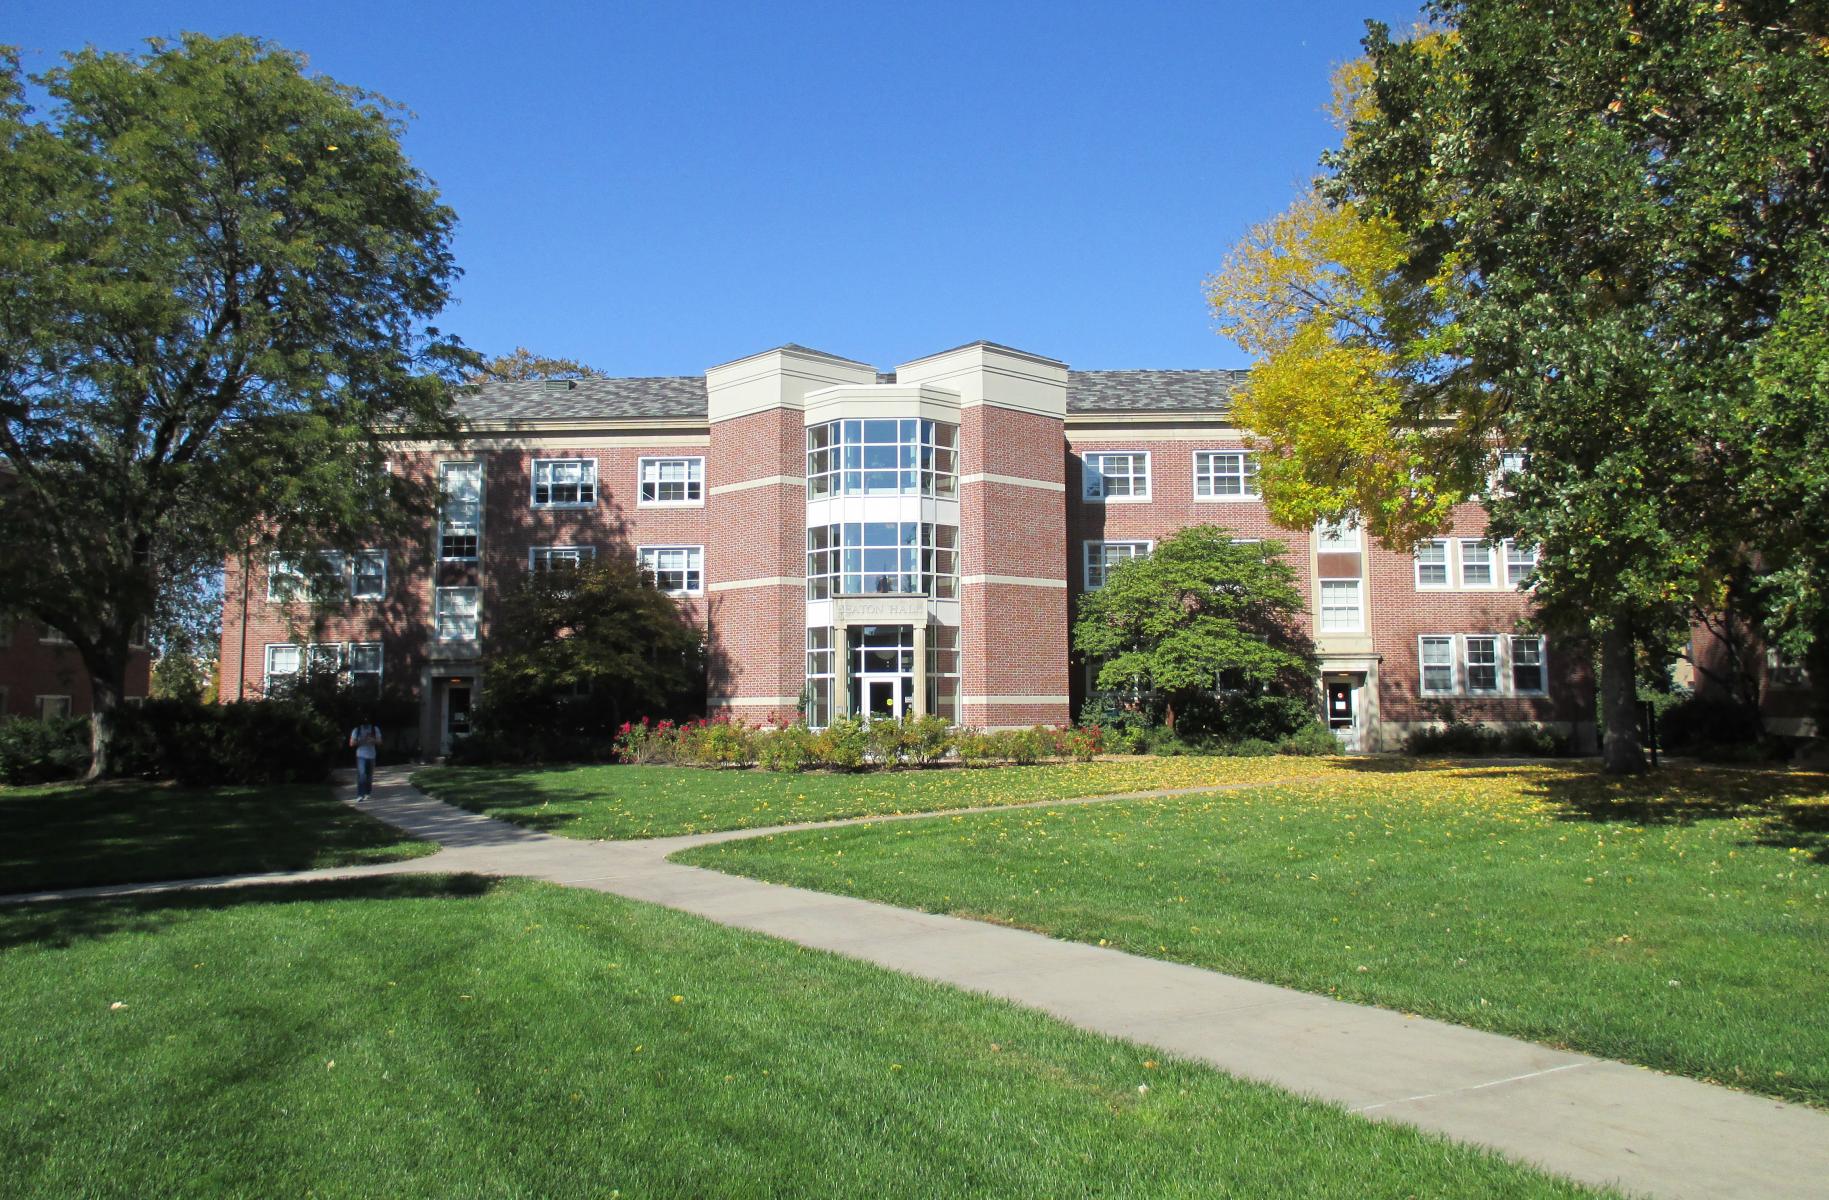 Office of Graduate Studies is located in Seaton Hall.